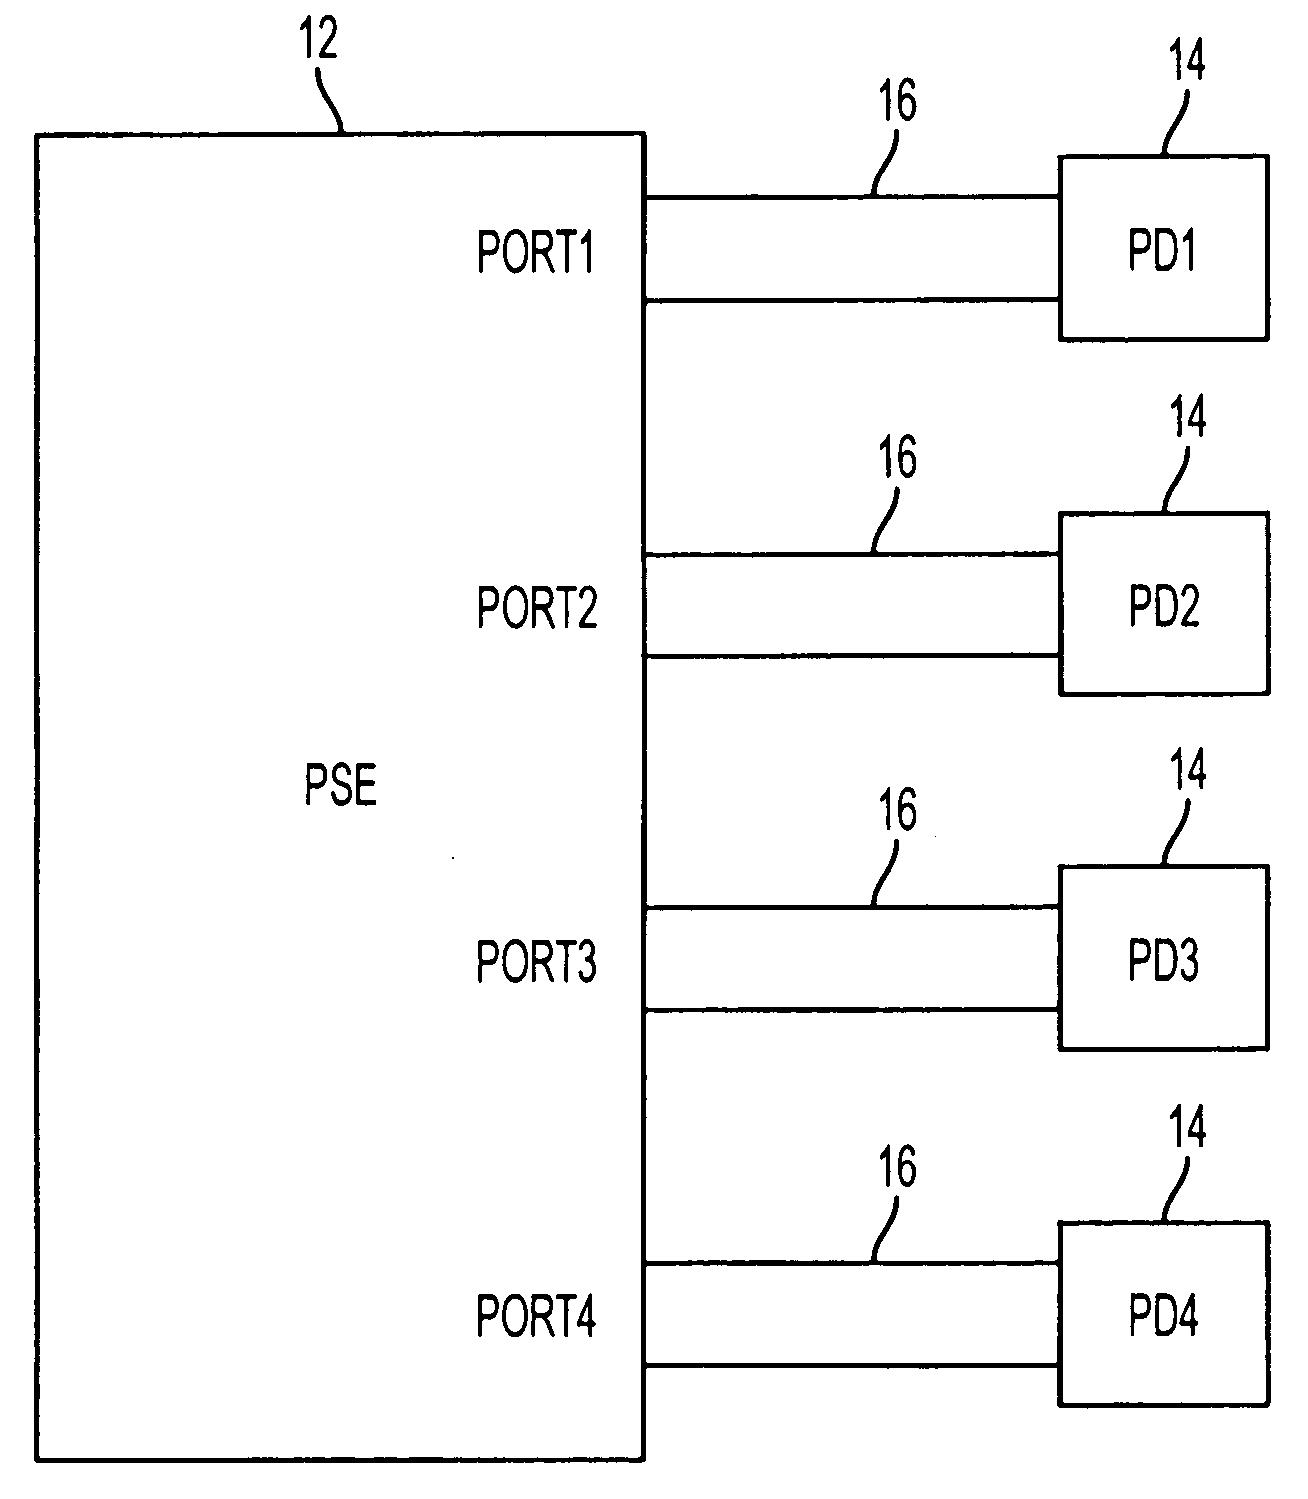 System for providing power over communication cable having mechanism for determining resistance of communication cable